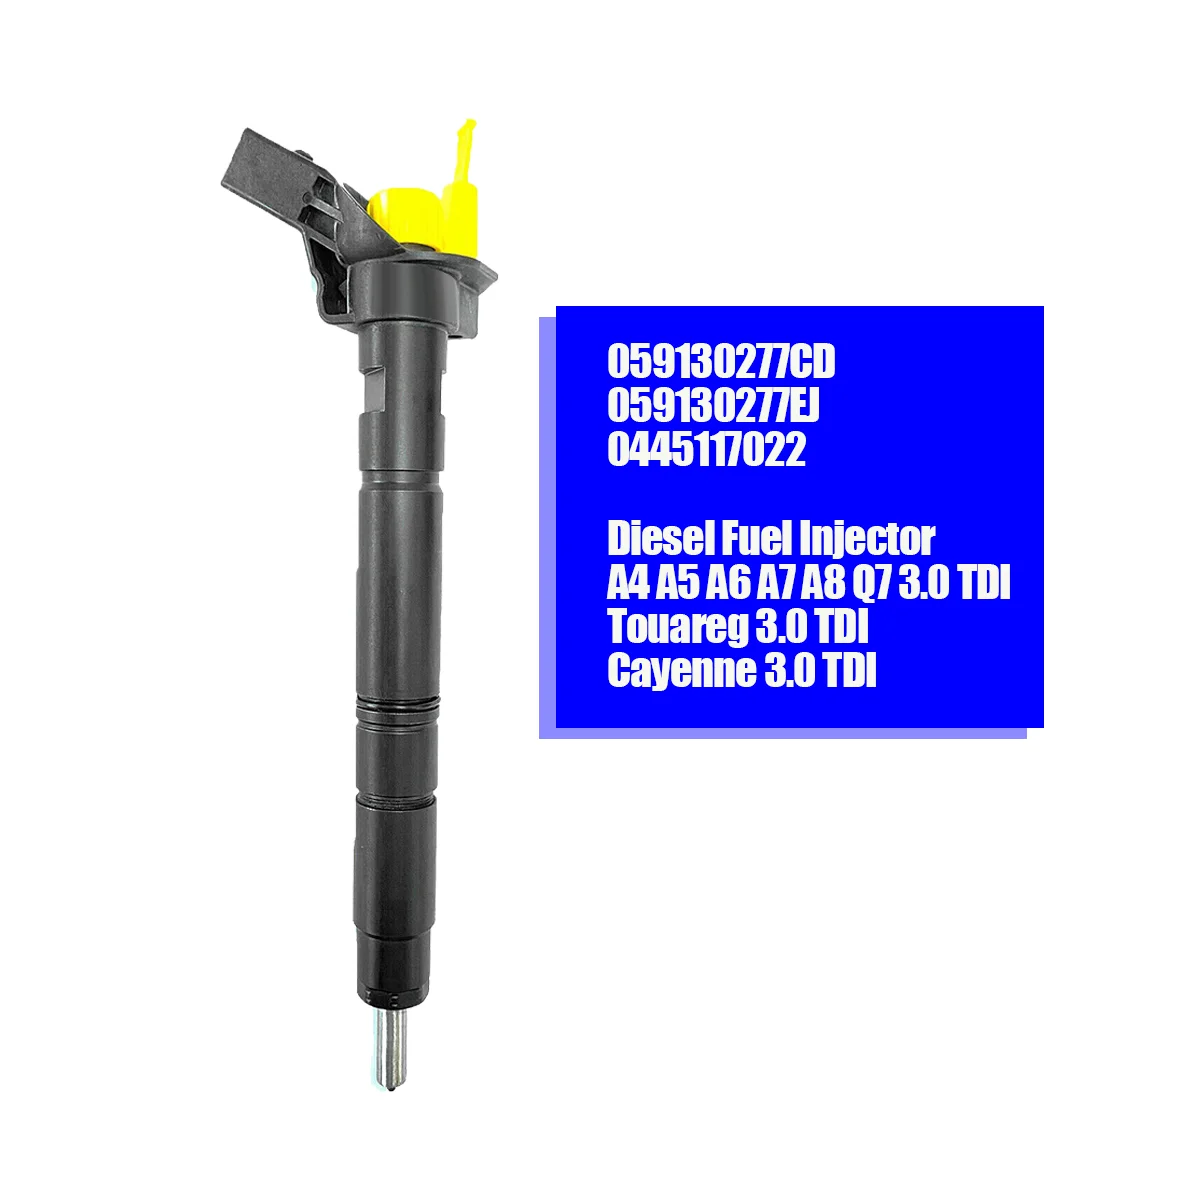 

New Crude Oil Fuel Injector Nozzle 0591302·77CD 0445117022 059130277EJ for Audi VW 3.0 TDI A4 A5 A6 TOUAREG